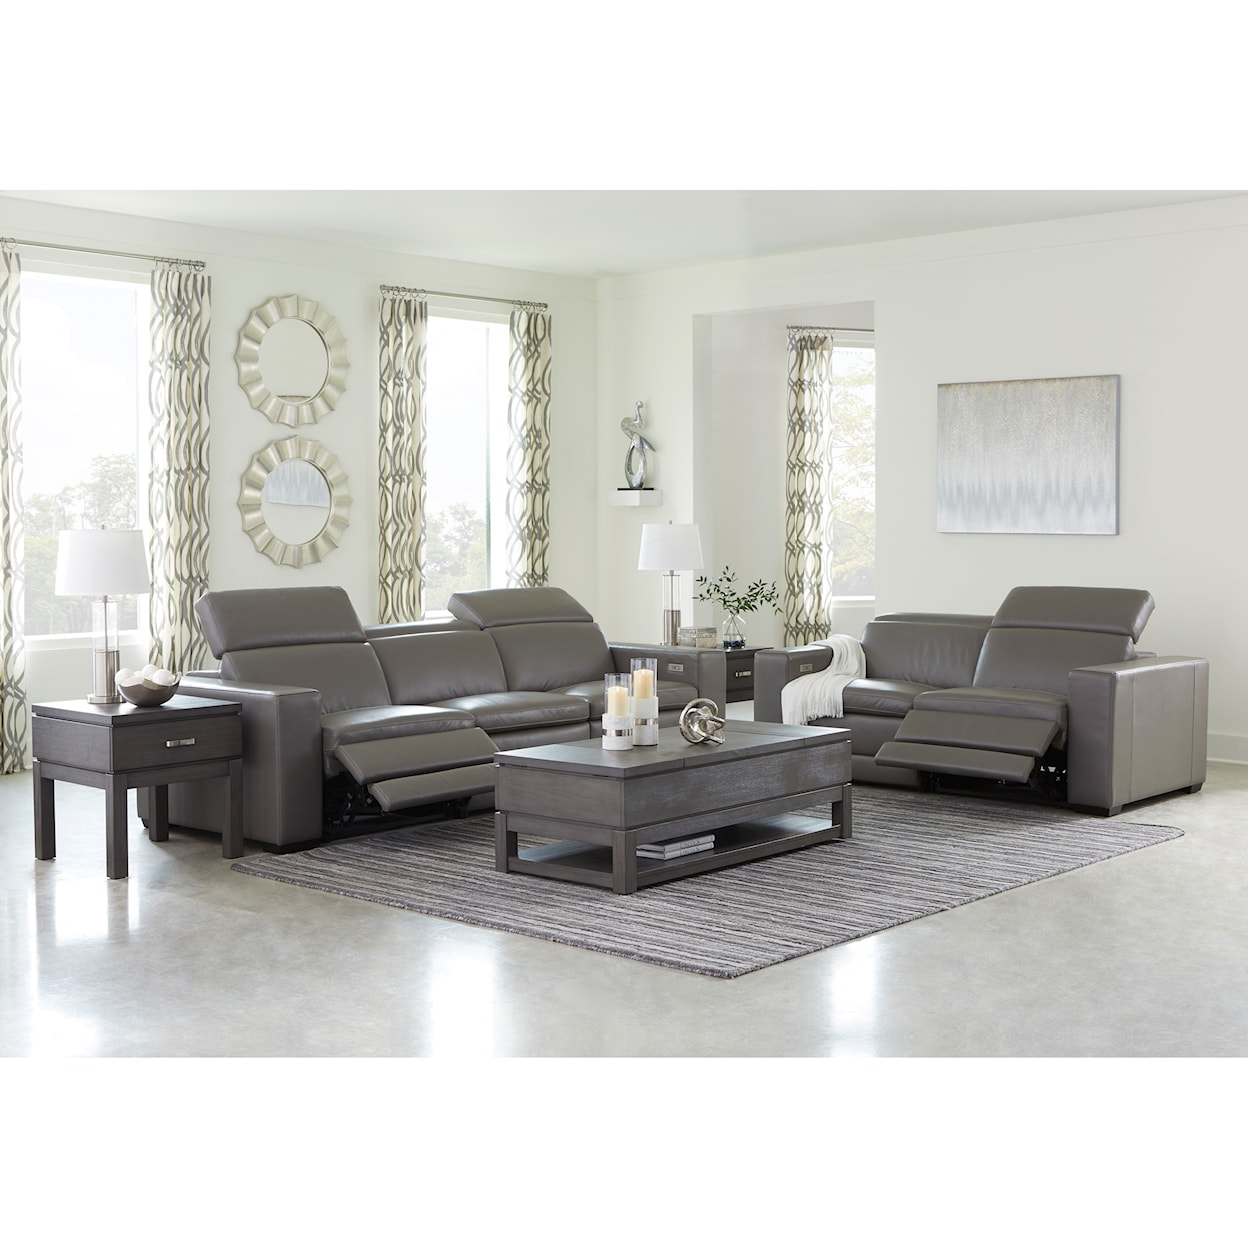 Signature Design by Ashley Furniture Texline Reclining Loveseat